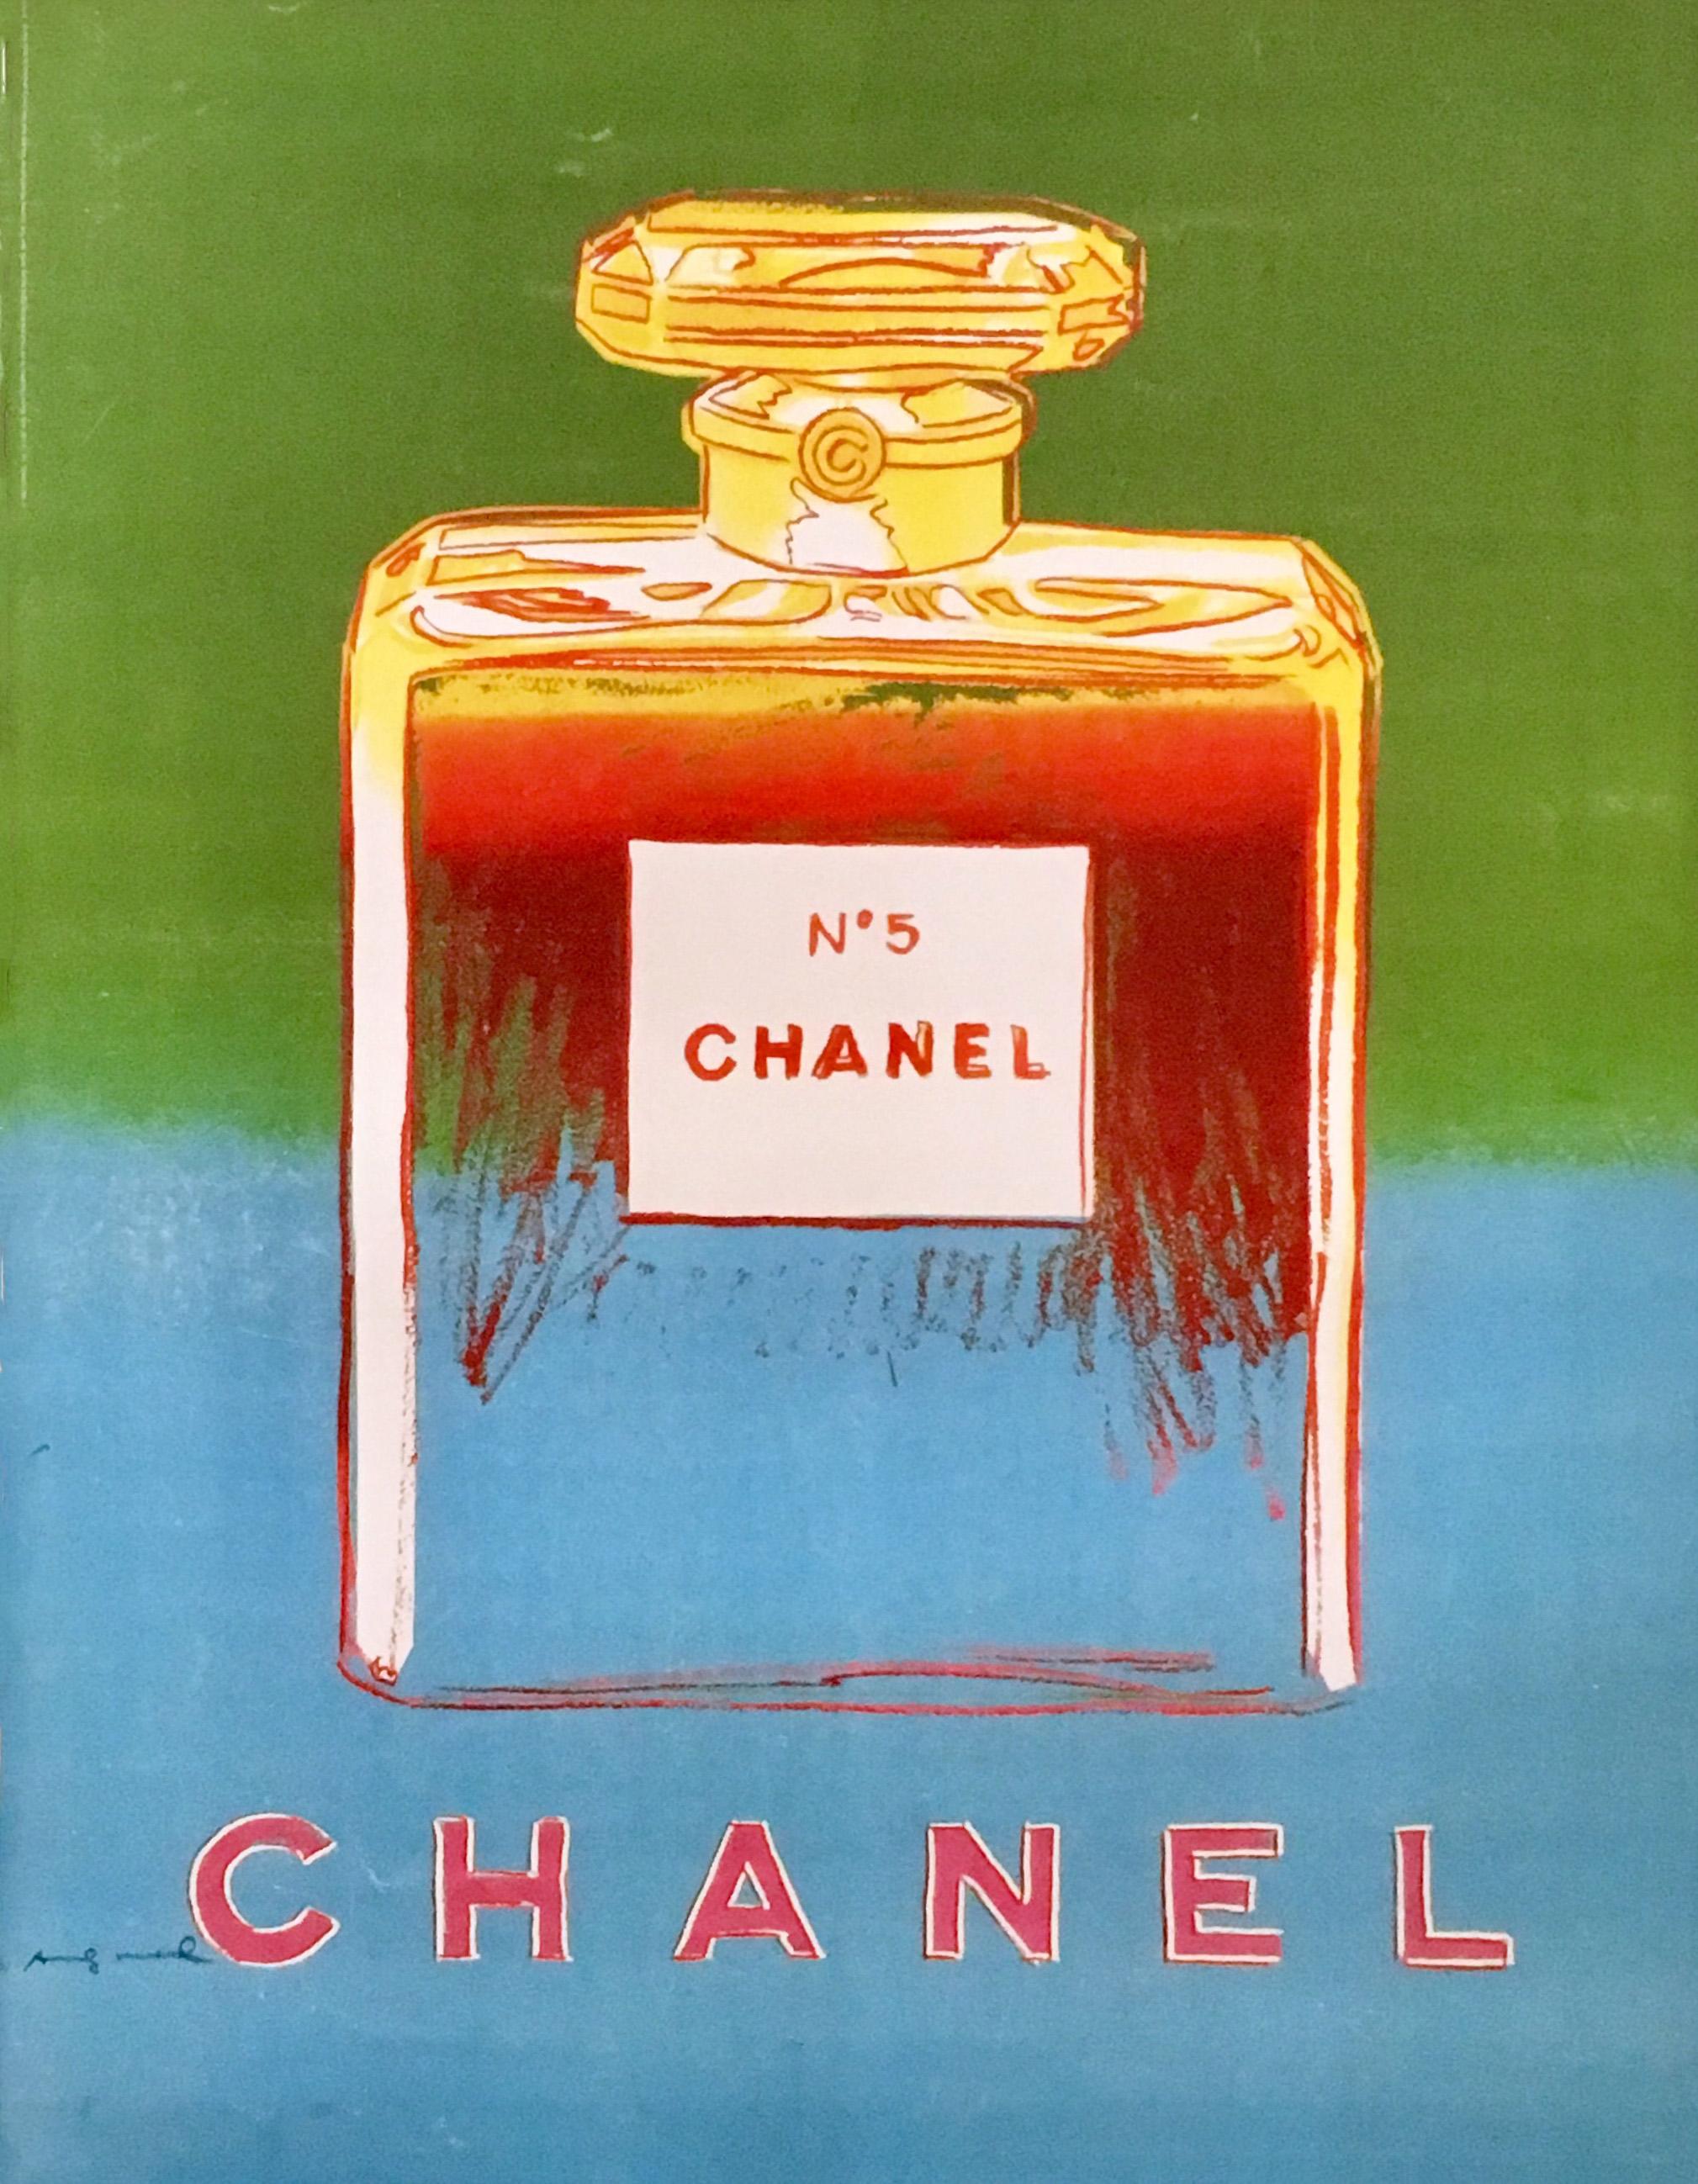 Chanel No. 5 Advertising Campaign Poster 1997 - Print by (after) Andy Warhol